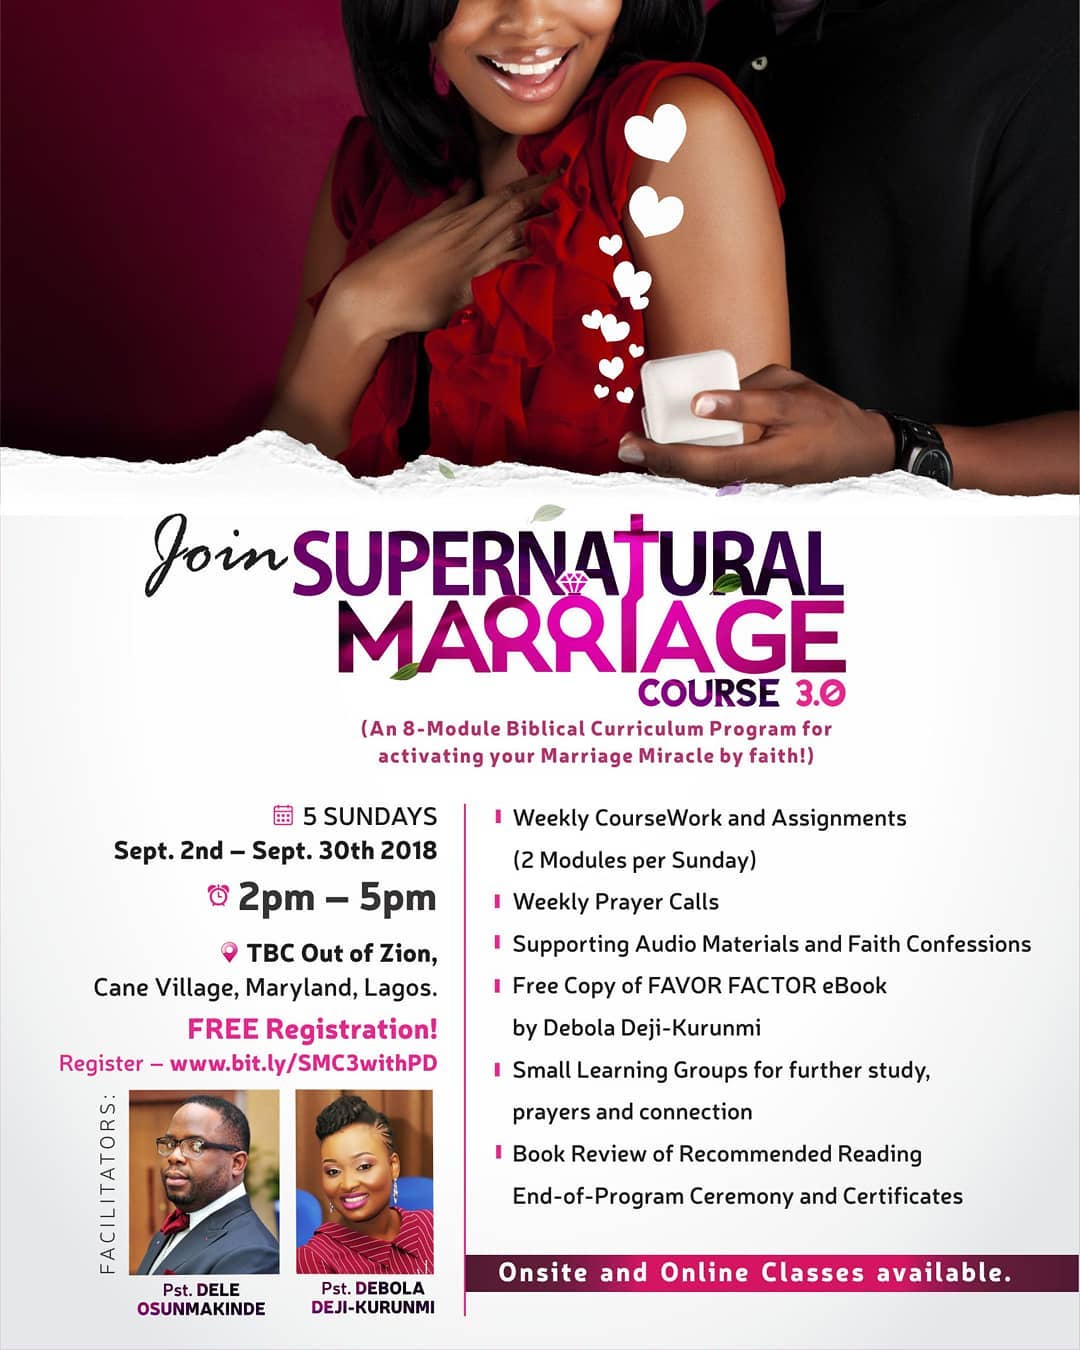 SUPERNATURAL MARRIAGE COURSE 3.0